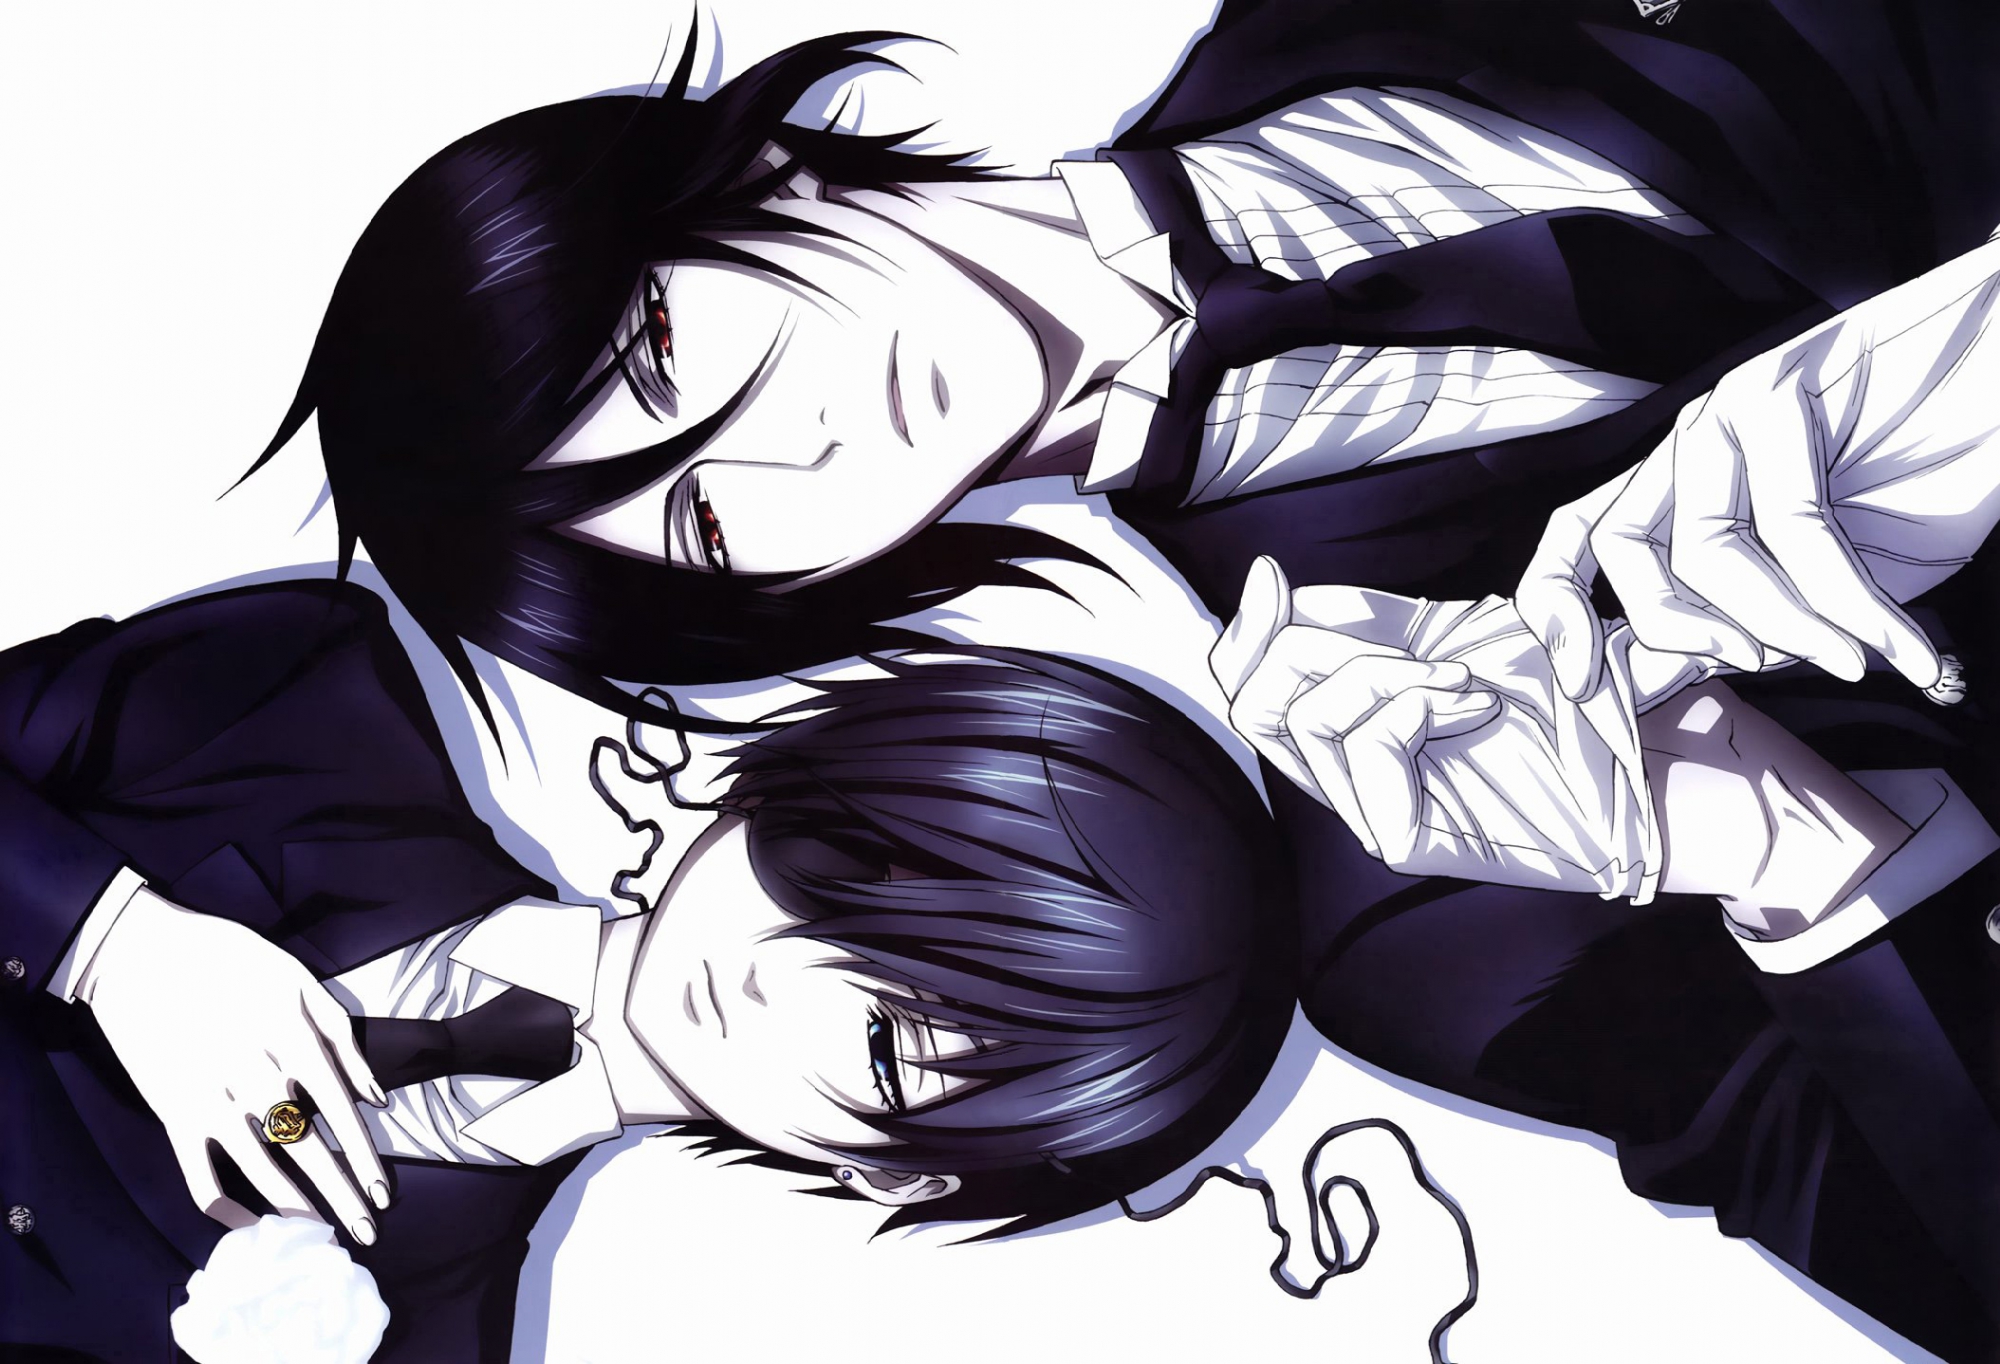 A dark, captivating desktop wallpaper featuring characters from the anime Black Butler.